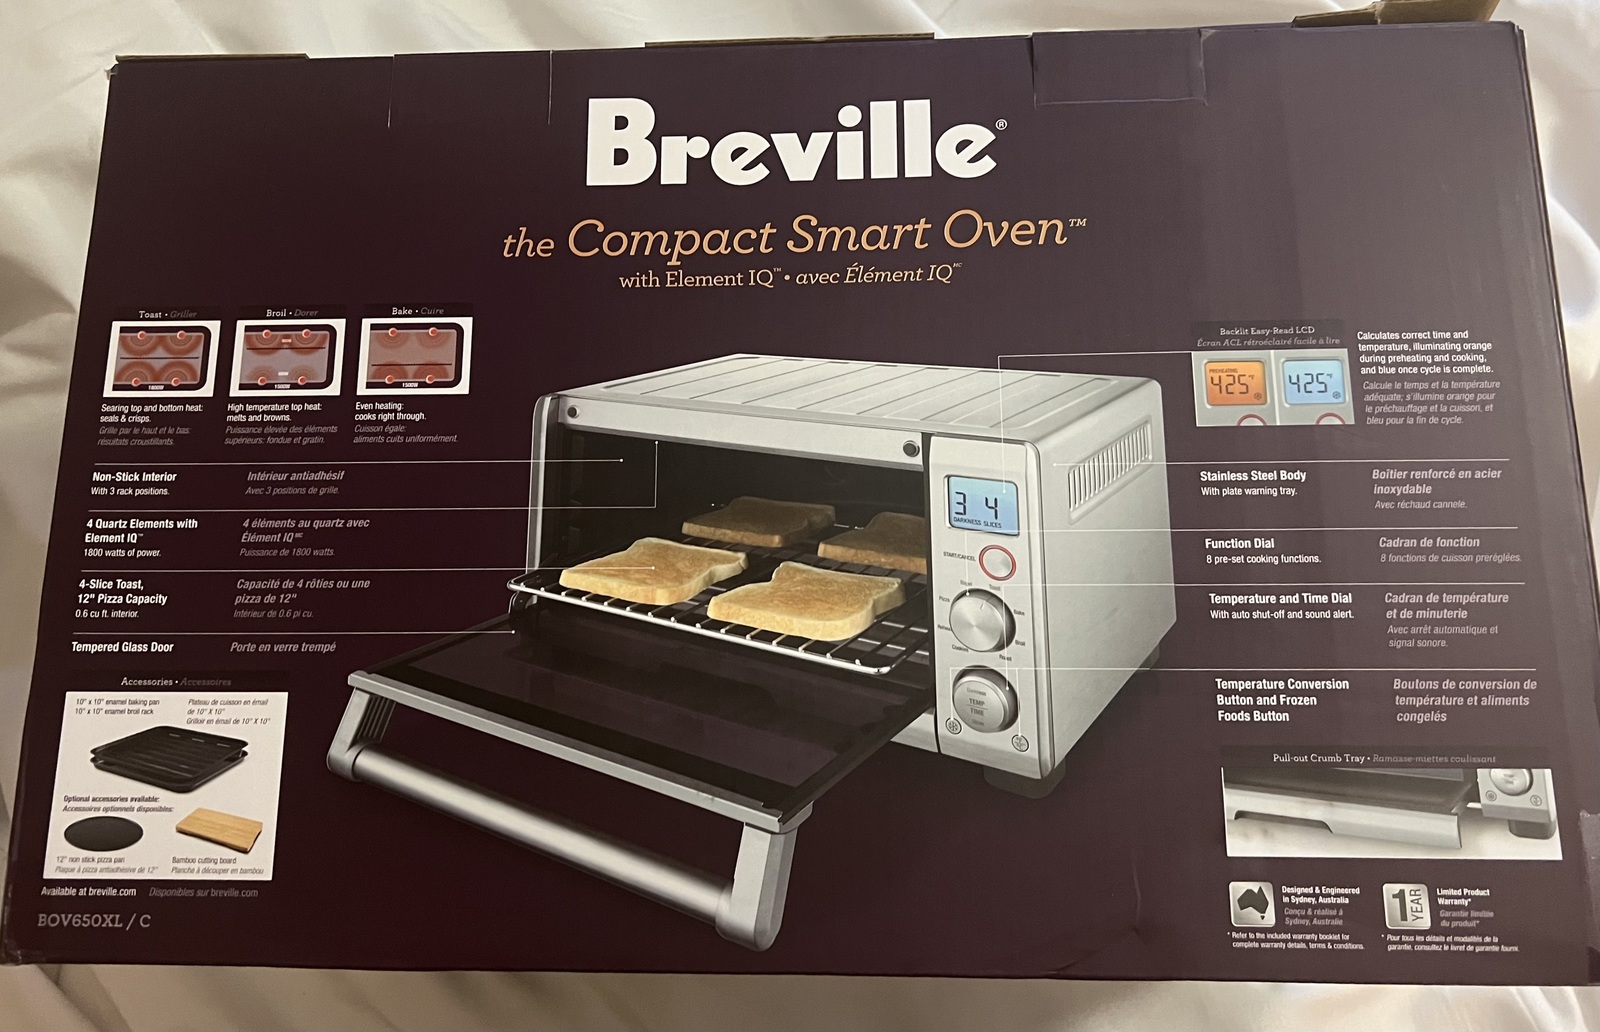 Primary image for Breville Compact Smart Toaster Oven, Brushed Stainless Steel BOV650XL